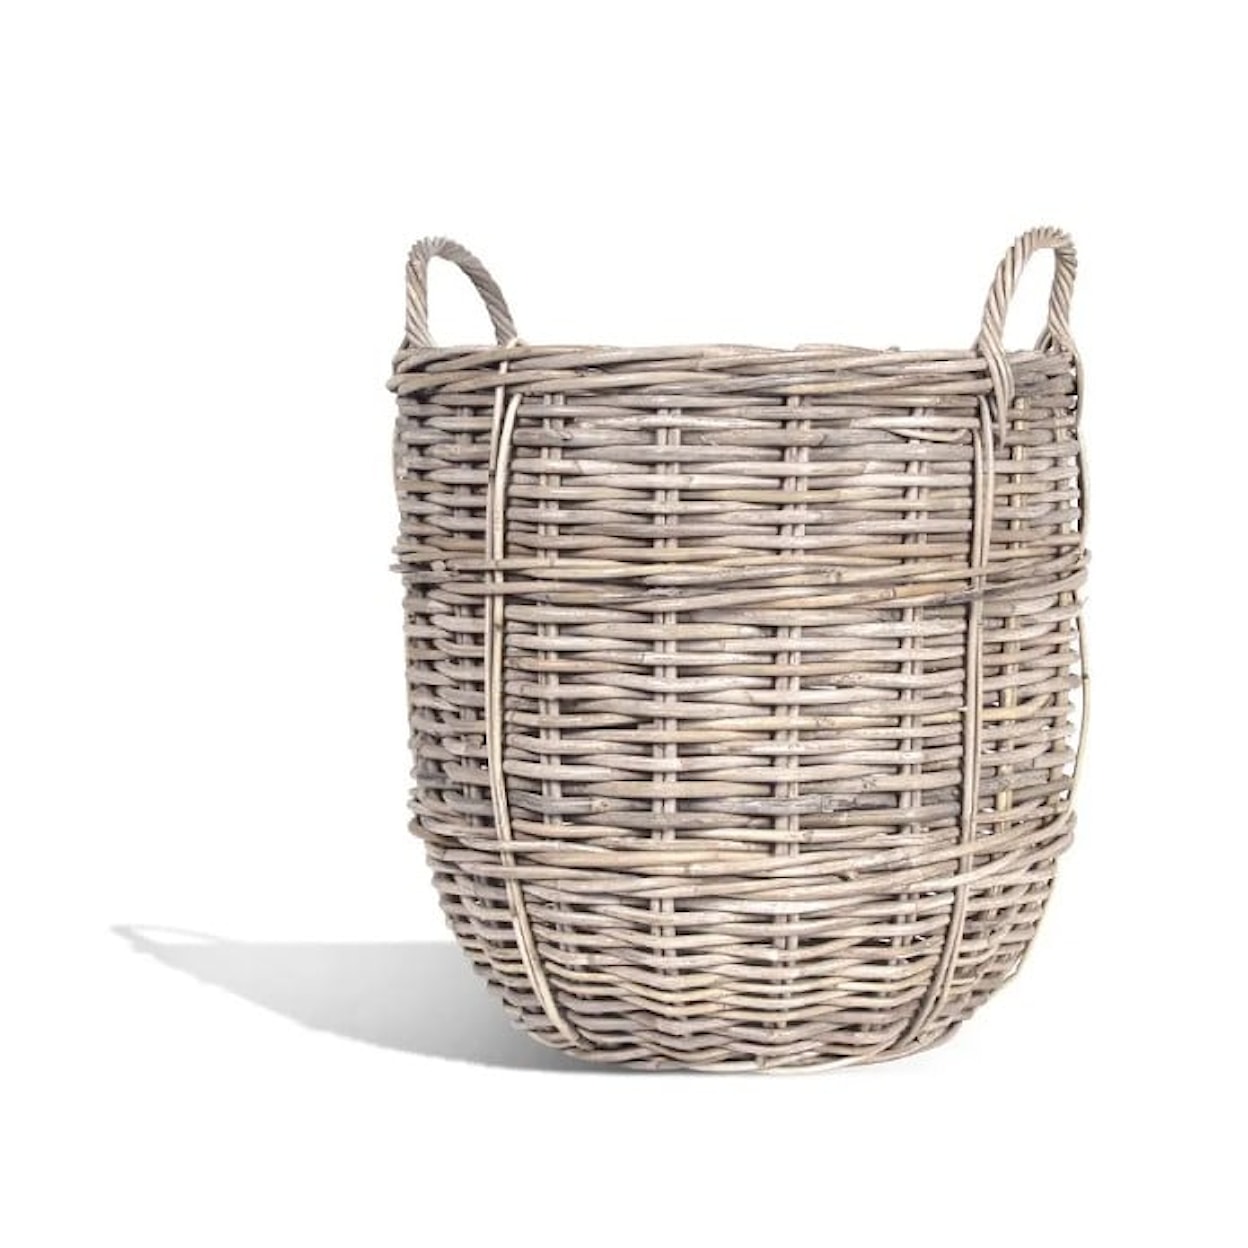 Ibolili Baskets and Sets SWEET PLUN RATTAN BASKET, ROUND- S/2